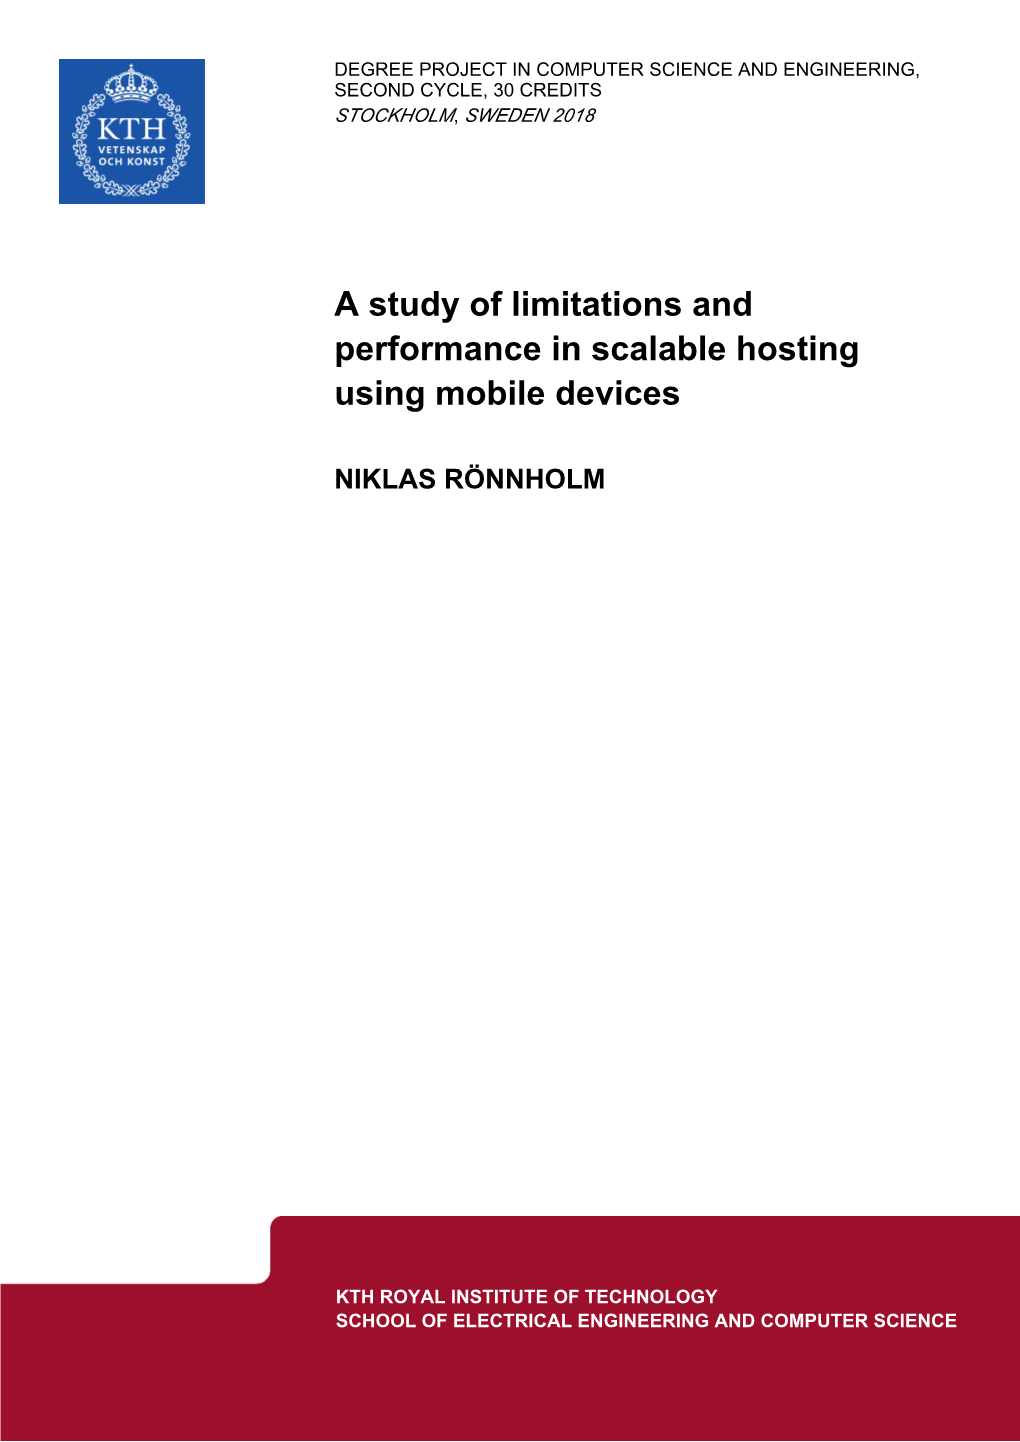 A Study of Limitations and Performance in Scalable Hosting Using Mobile Devices